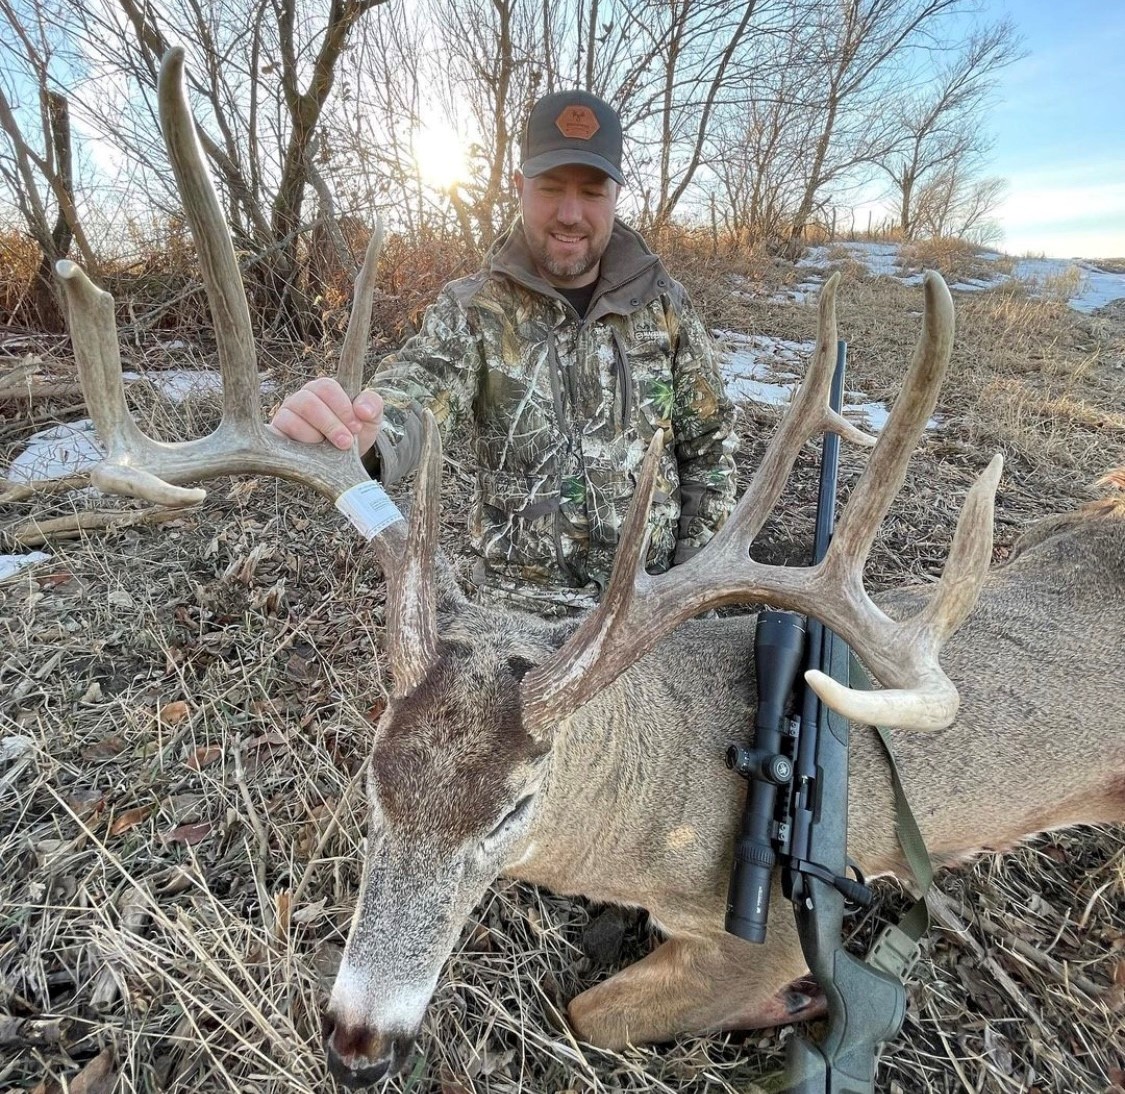 Congratulations to the @Buckventures crew who continued to put the big bucks on the ground despite the ups and downs of the 2021 deer season. Was the 2021 deer season good to you? #IAMSPORTSMAN #hunting #deer #deerhunting #whitetail #whitetailhunting #deerseason #2021